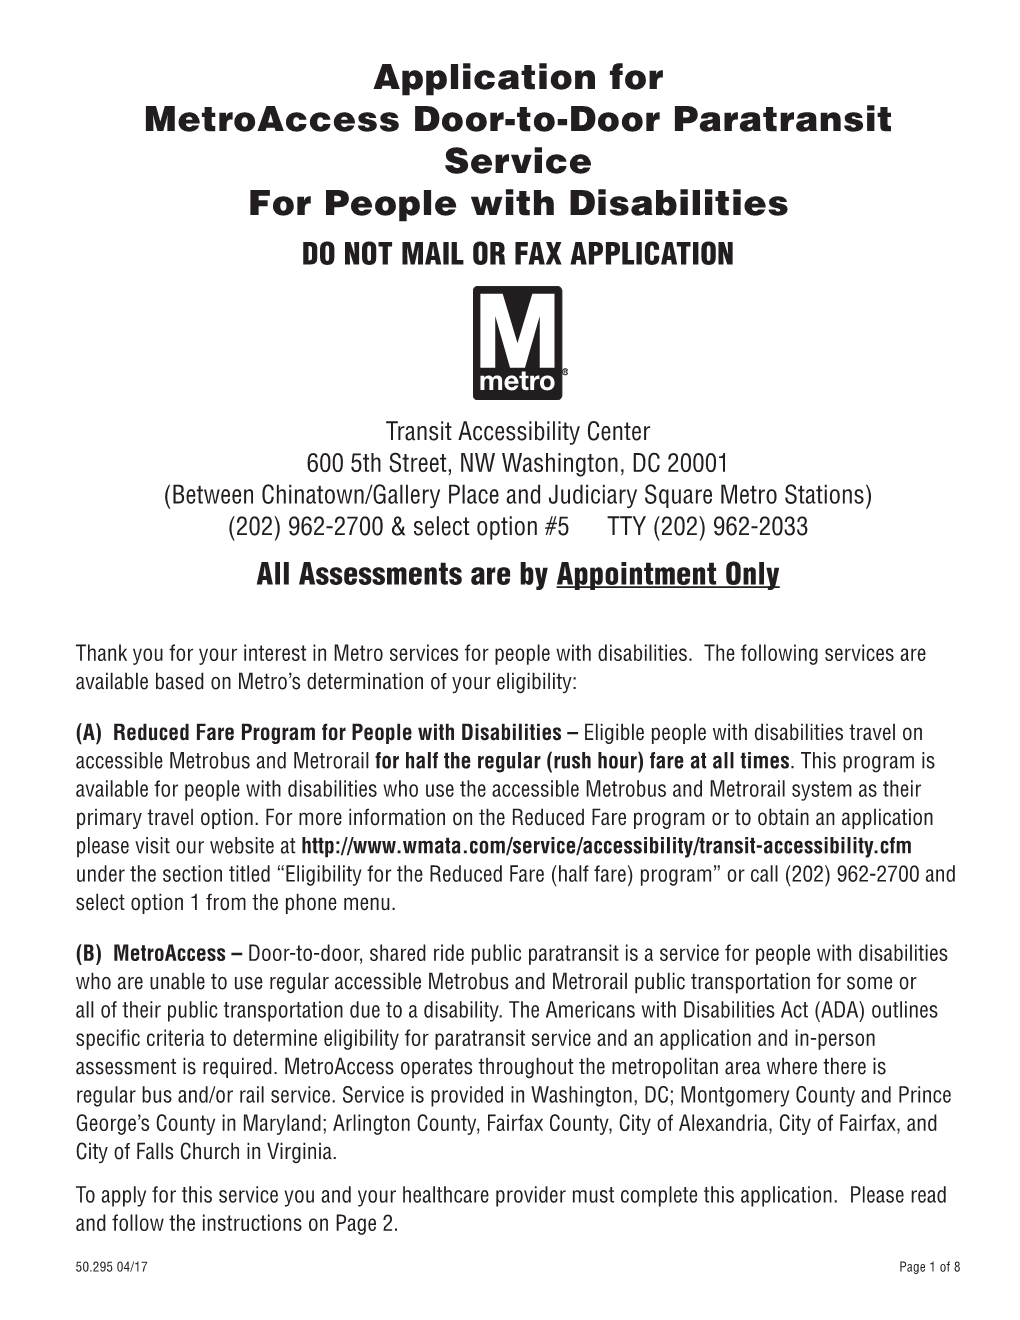 Application for Metroaccess Door-To-Door Paratransit Service for People with Disabilities DO NOT MAIL OR FAX APPLICATION